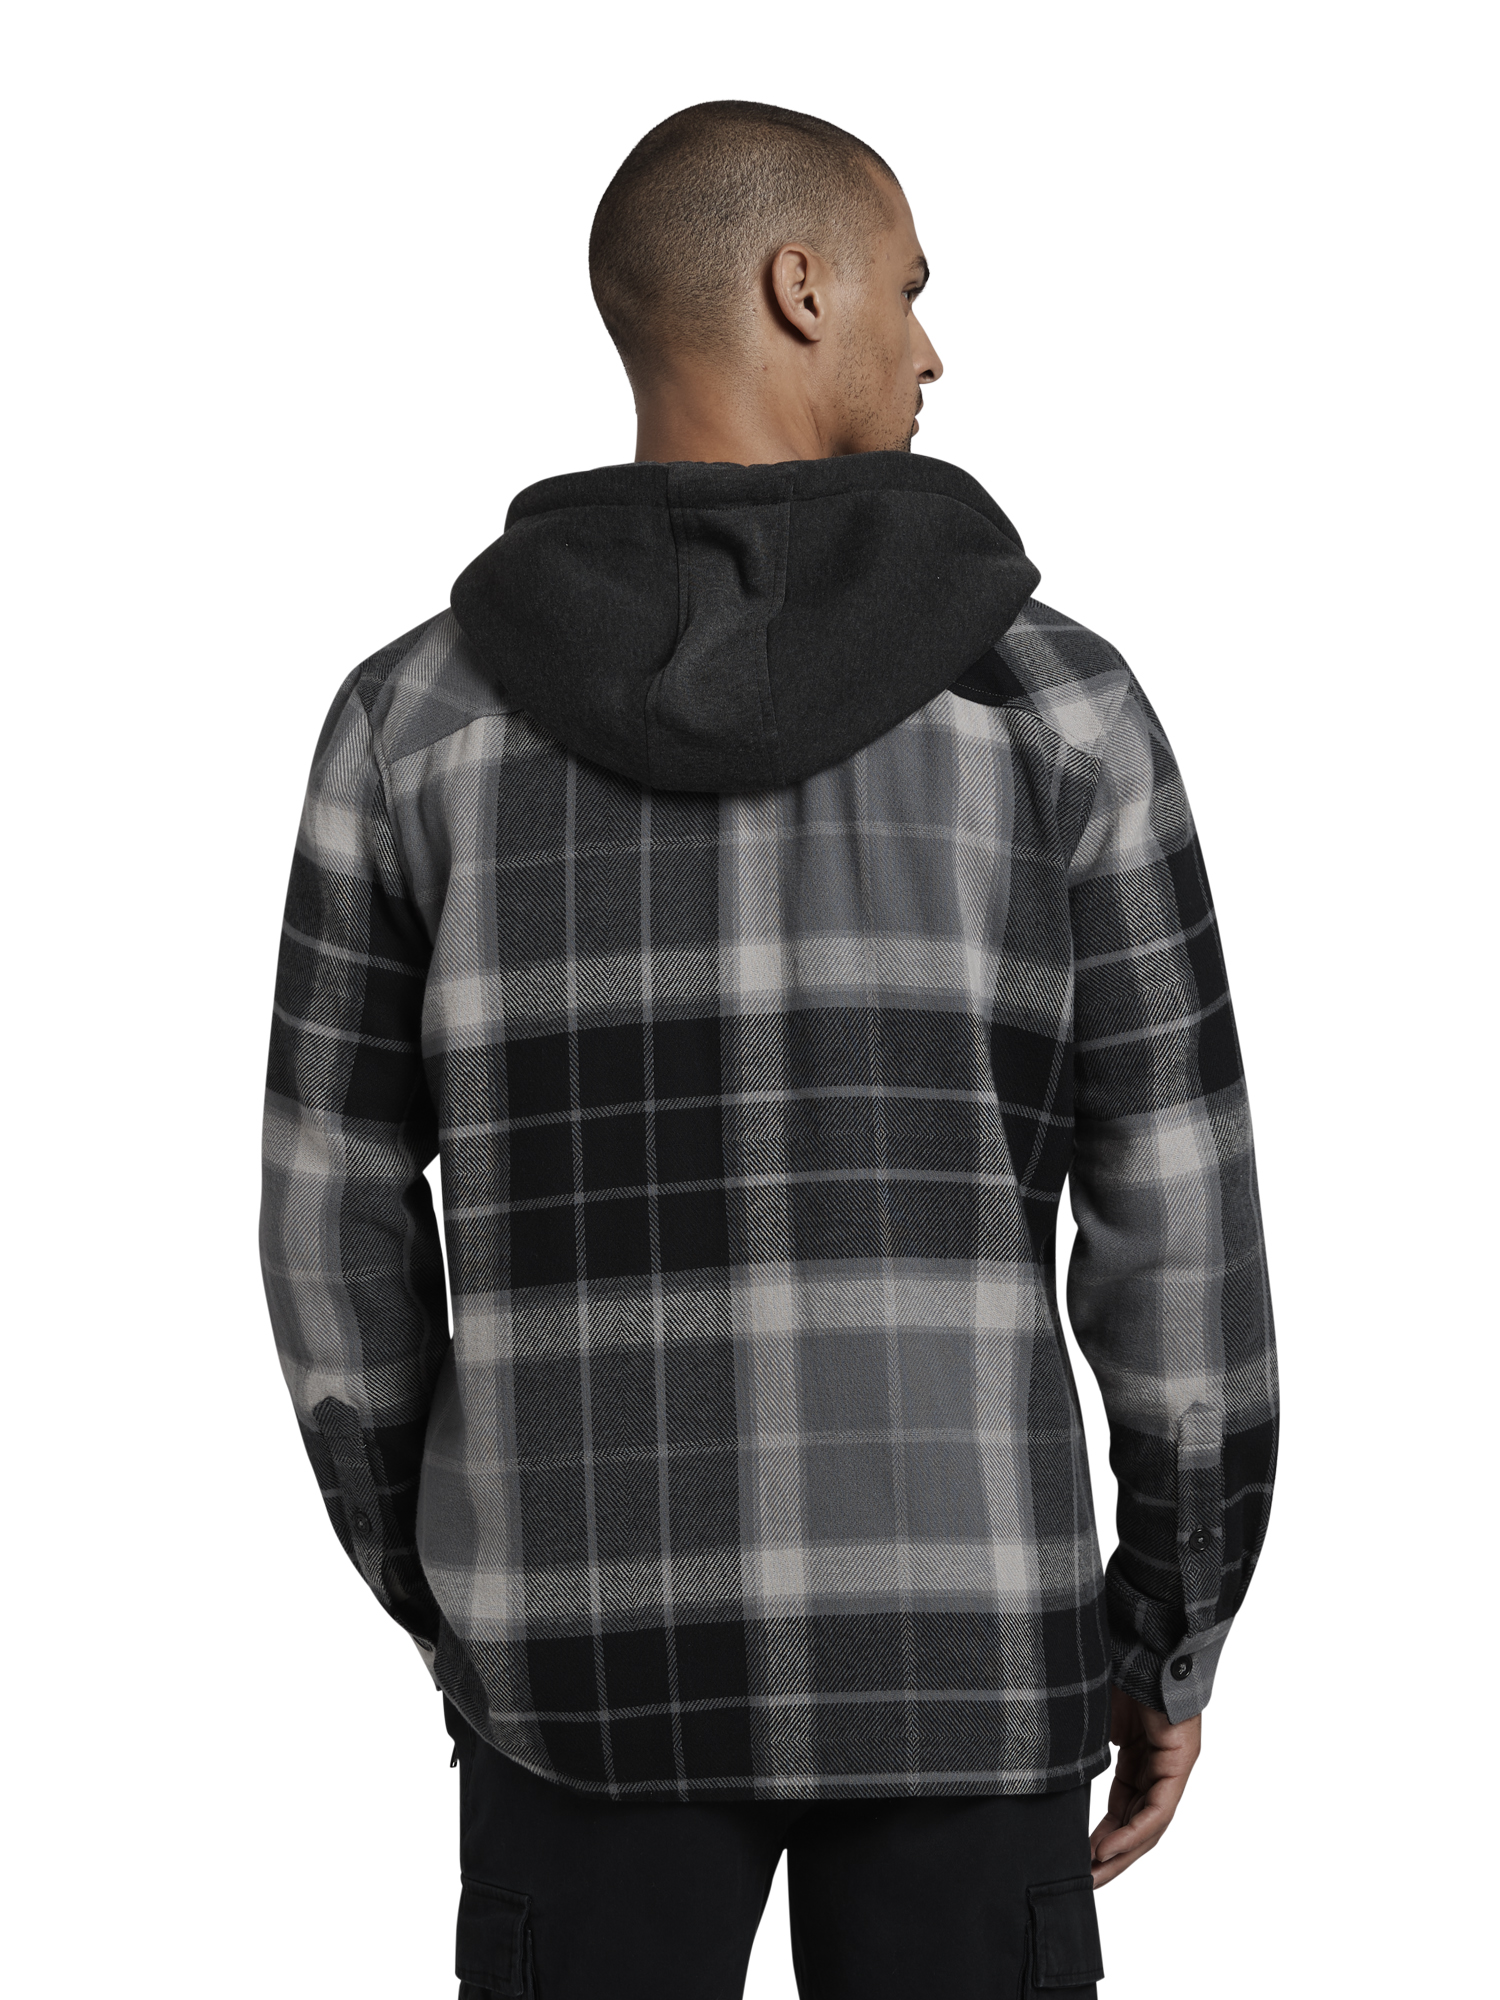 Dogg Supply by Snoop Dogg Men's and Big Men's Hooded Flannel Shirt ...